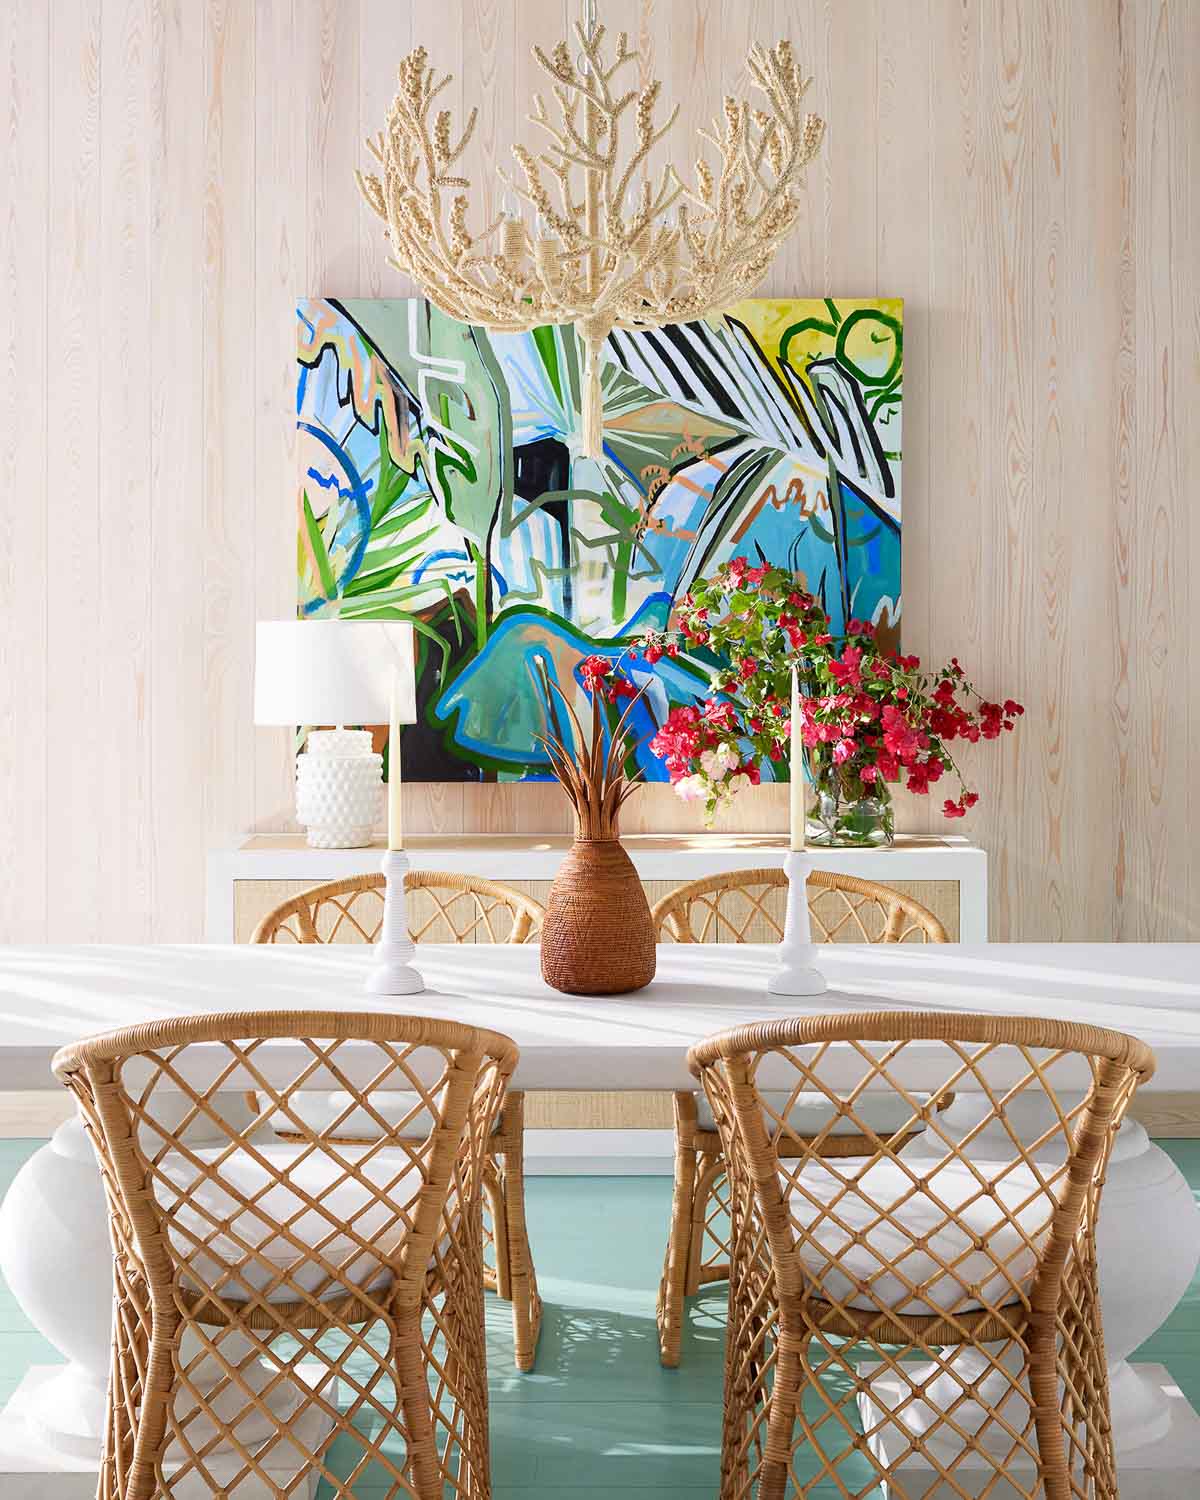 Large scale colorful art as dining room wall decor